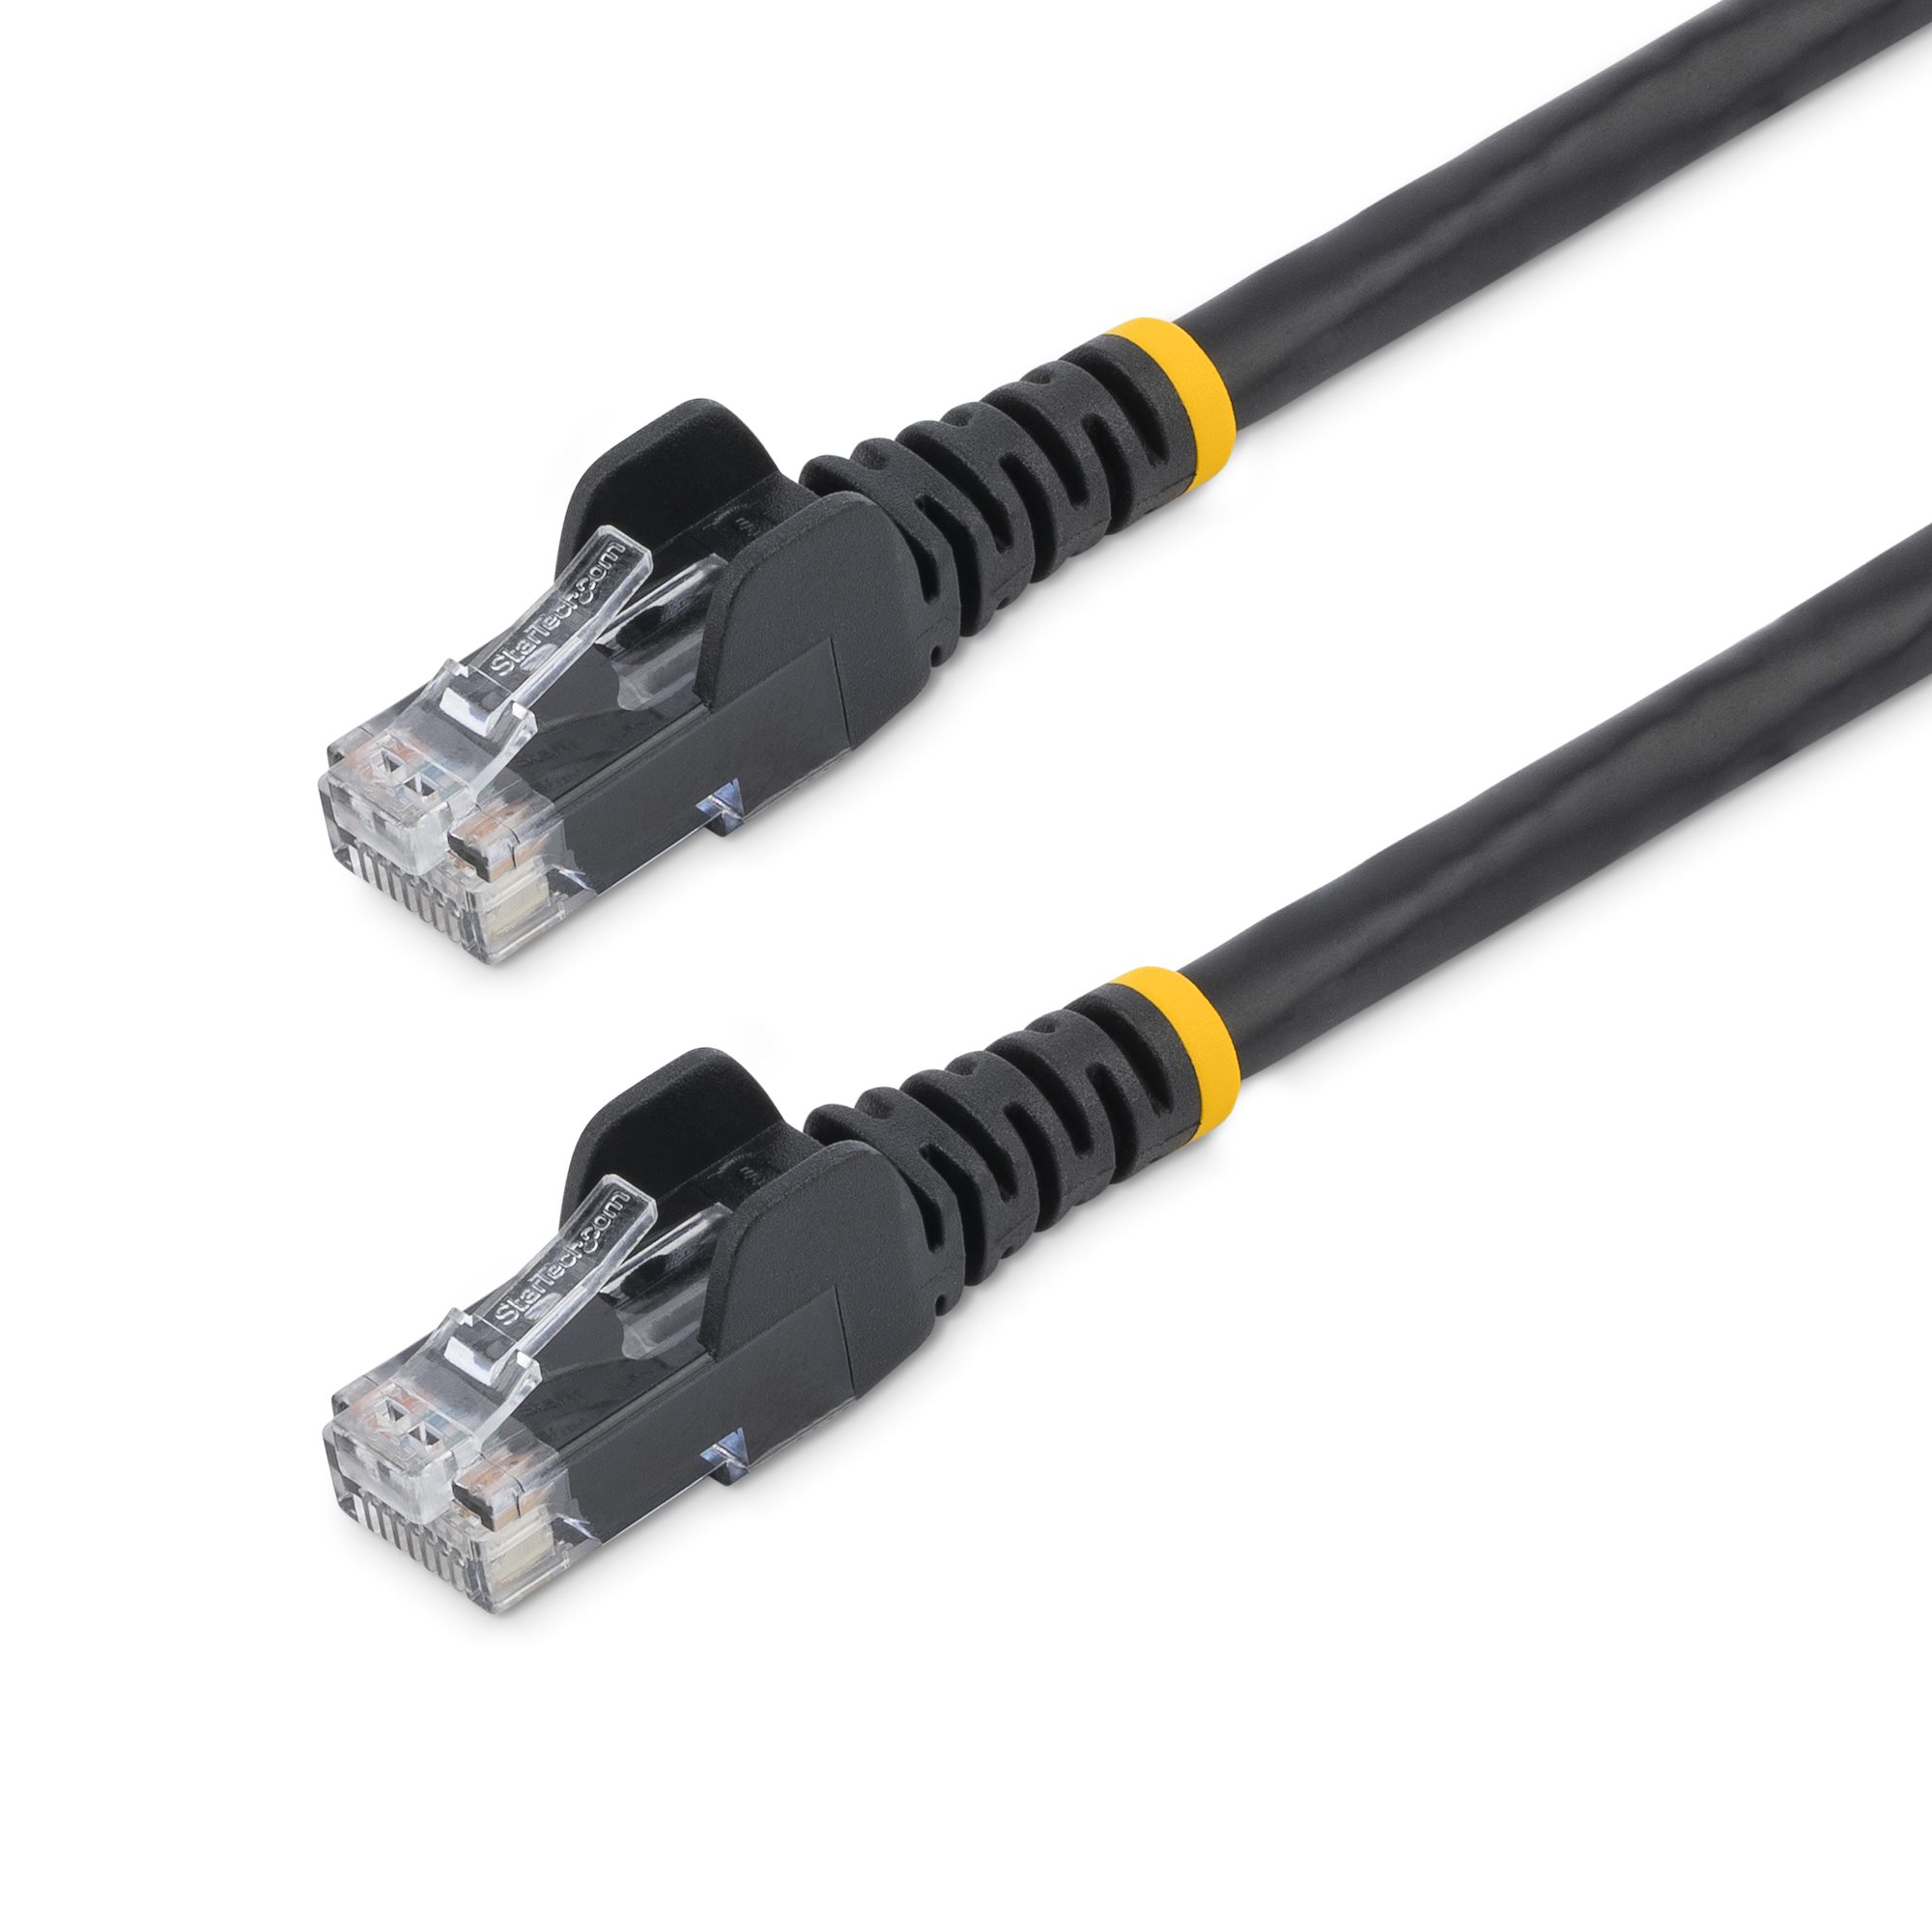 15 Ft Cat6 UTP Ethernet Network Non Booted Cable Black Patch Cables 10 Pack